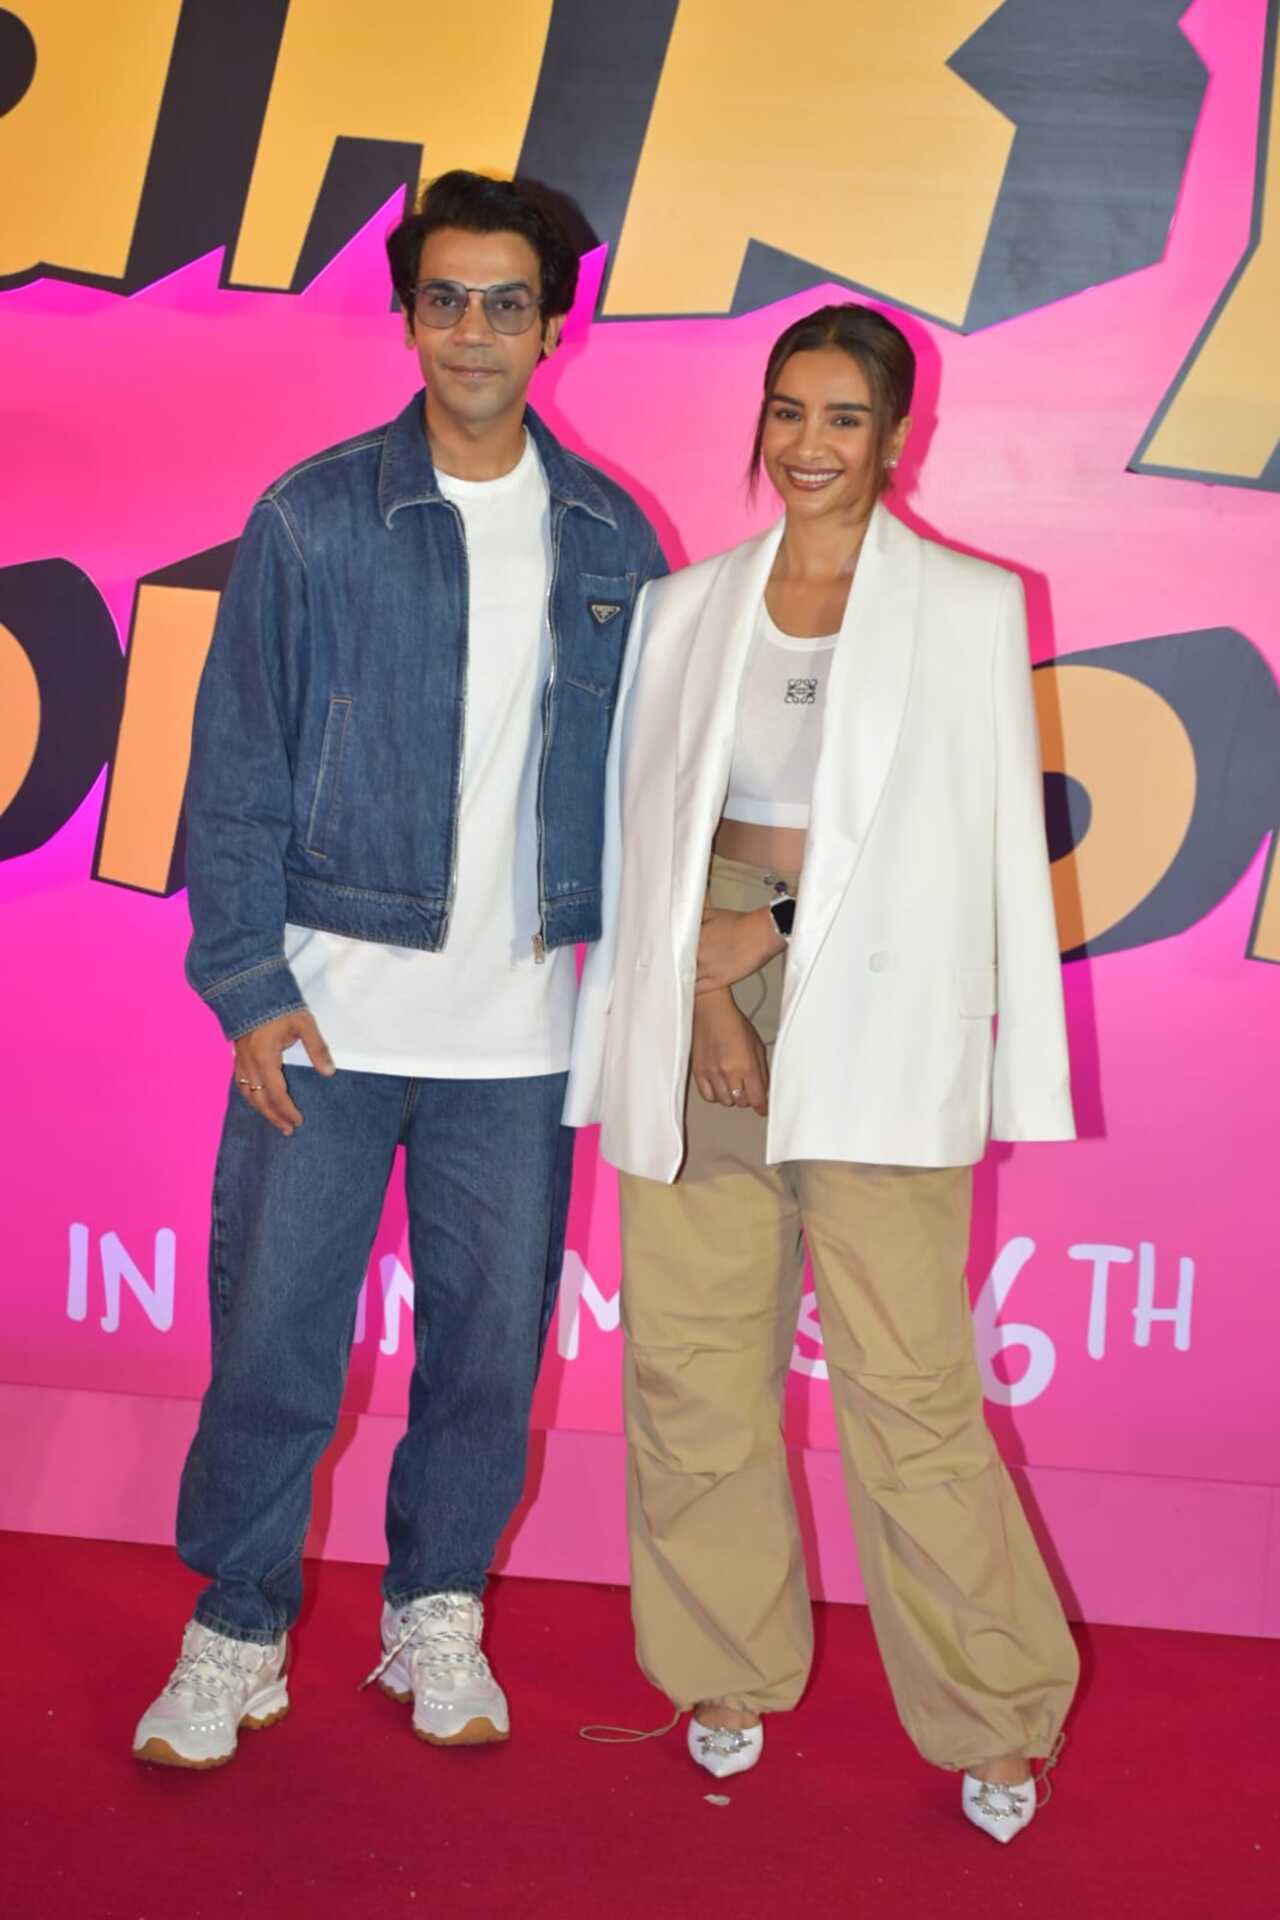 Rajkummar Rao and Patralekhaa cheered for the team of Thank You For Coming at the premiere